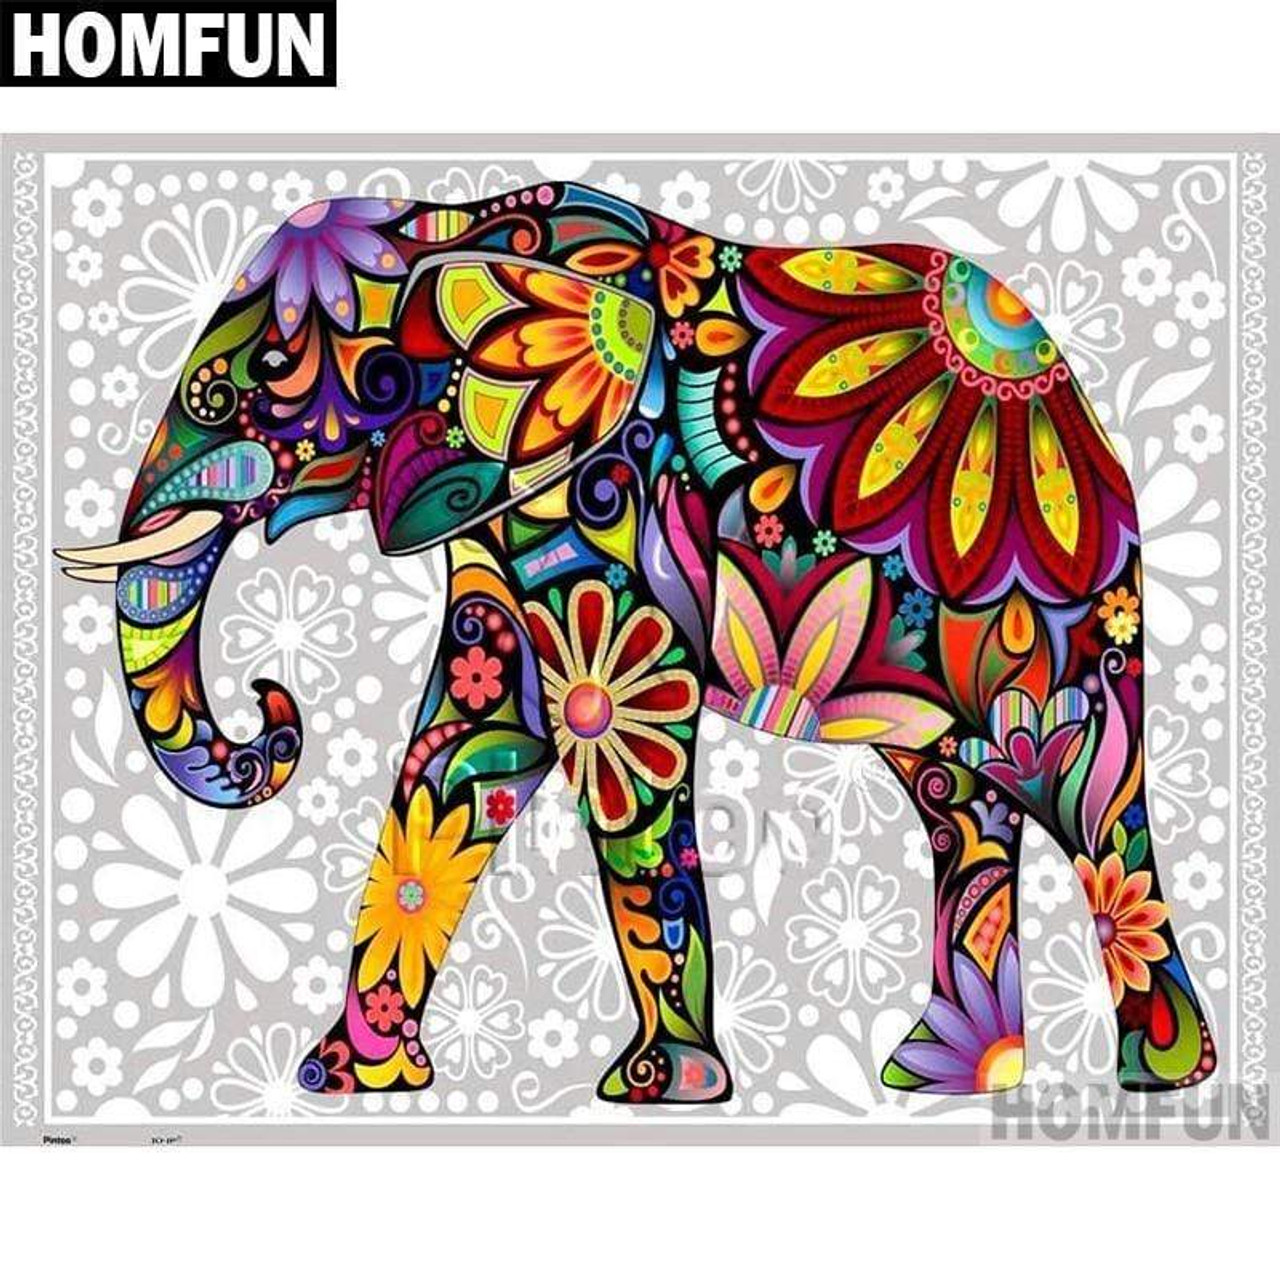 Sparkly Selections Elephant Glow in the Dark Diamond Painting Kit